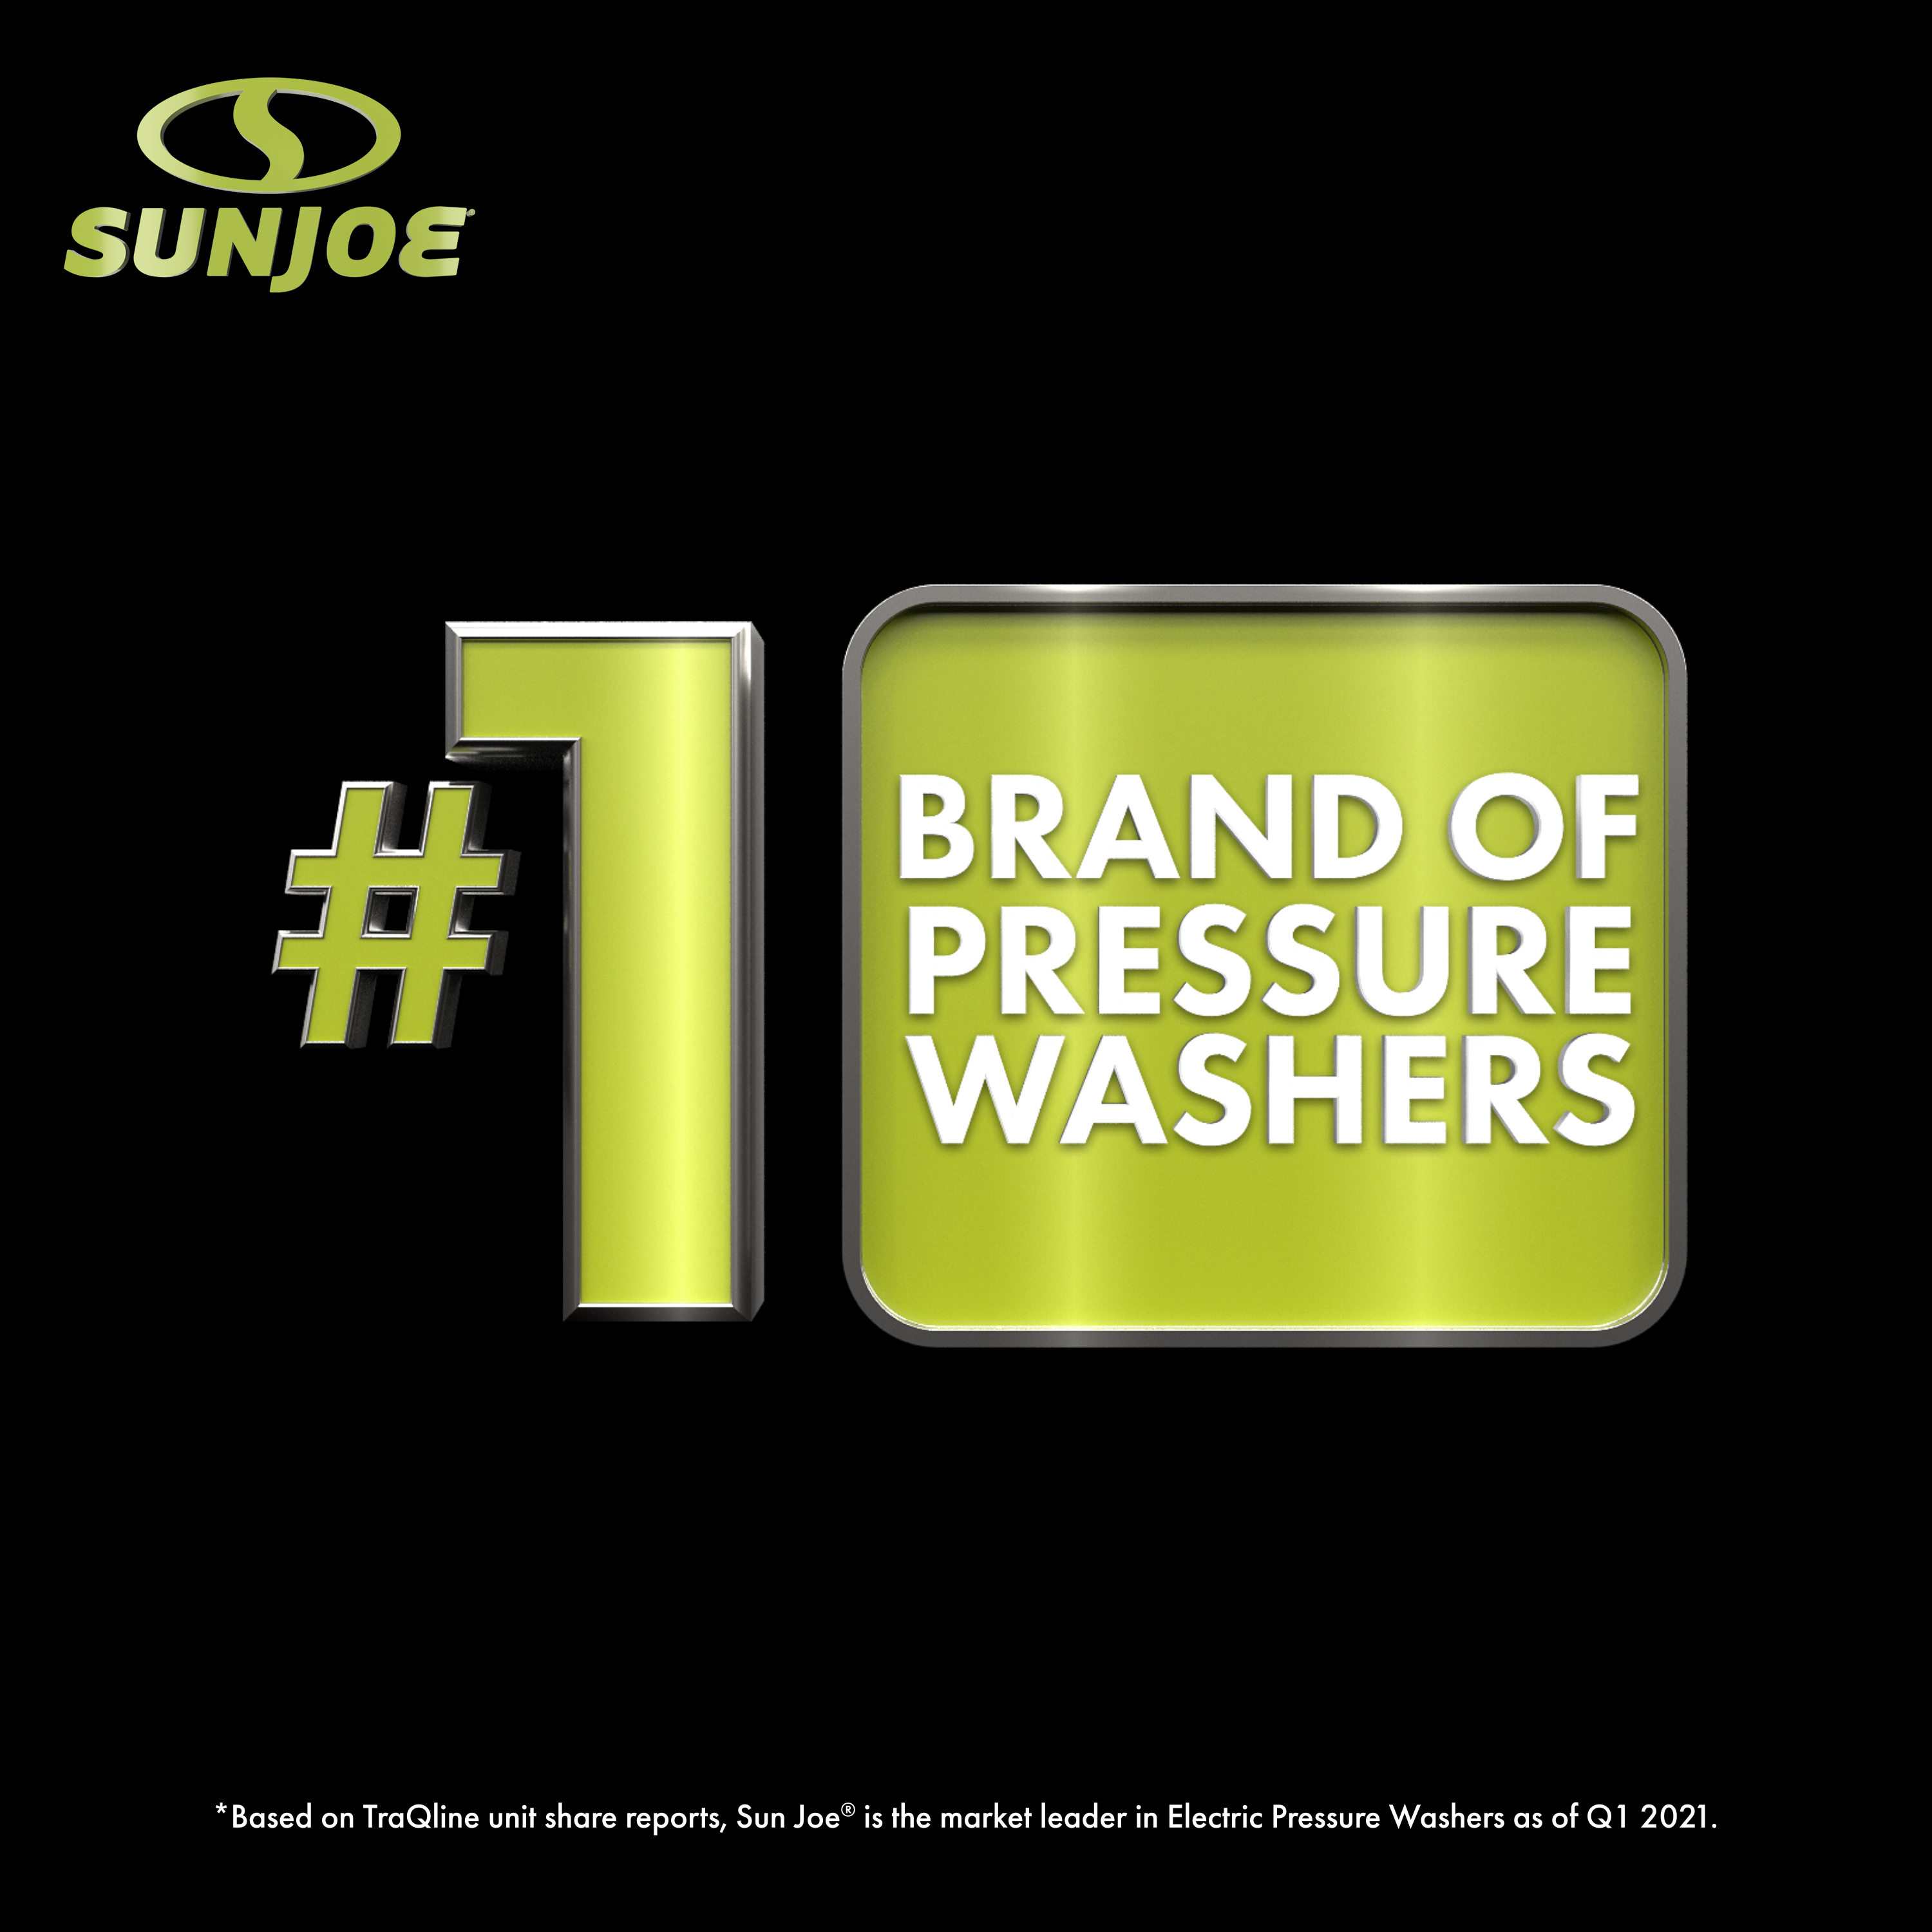 Based on TraQline unit share reports, Sun Joe® is the market leader in Electric Pressure Washers as of Q1 2021.